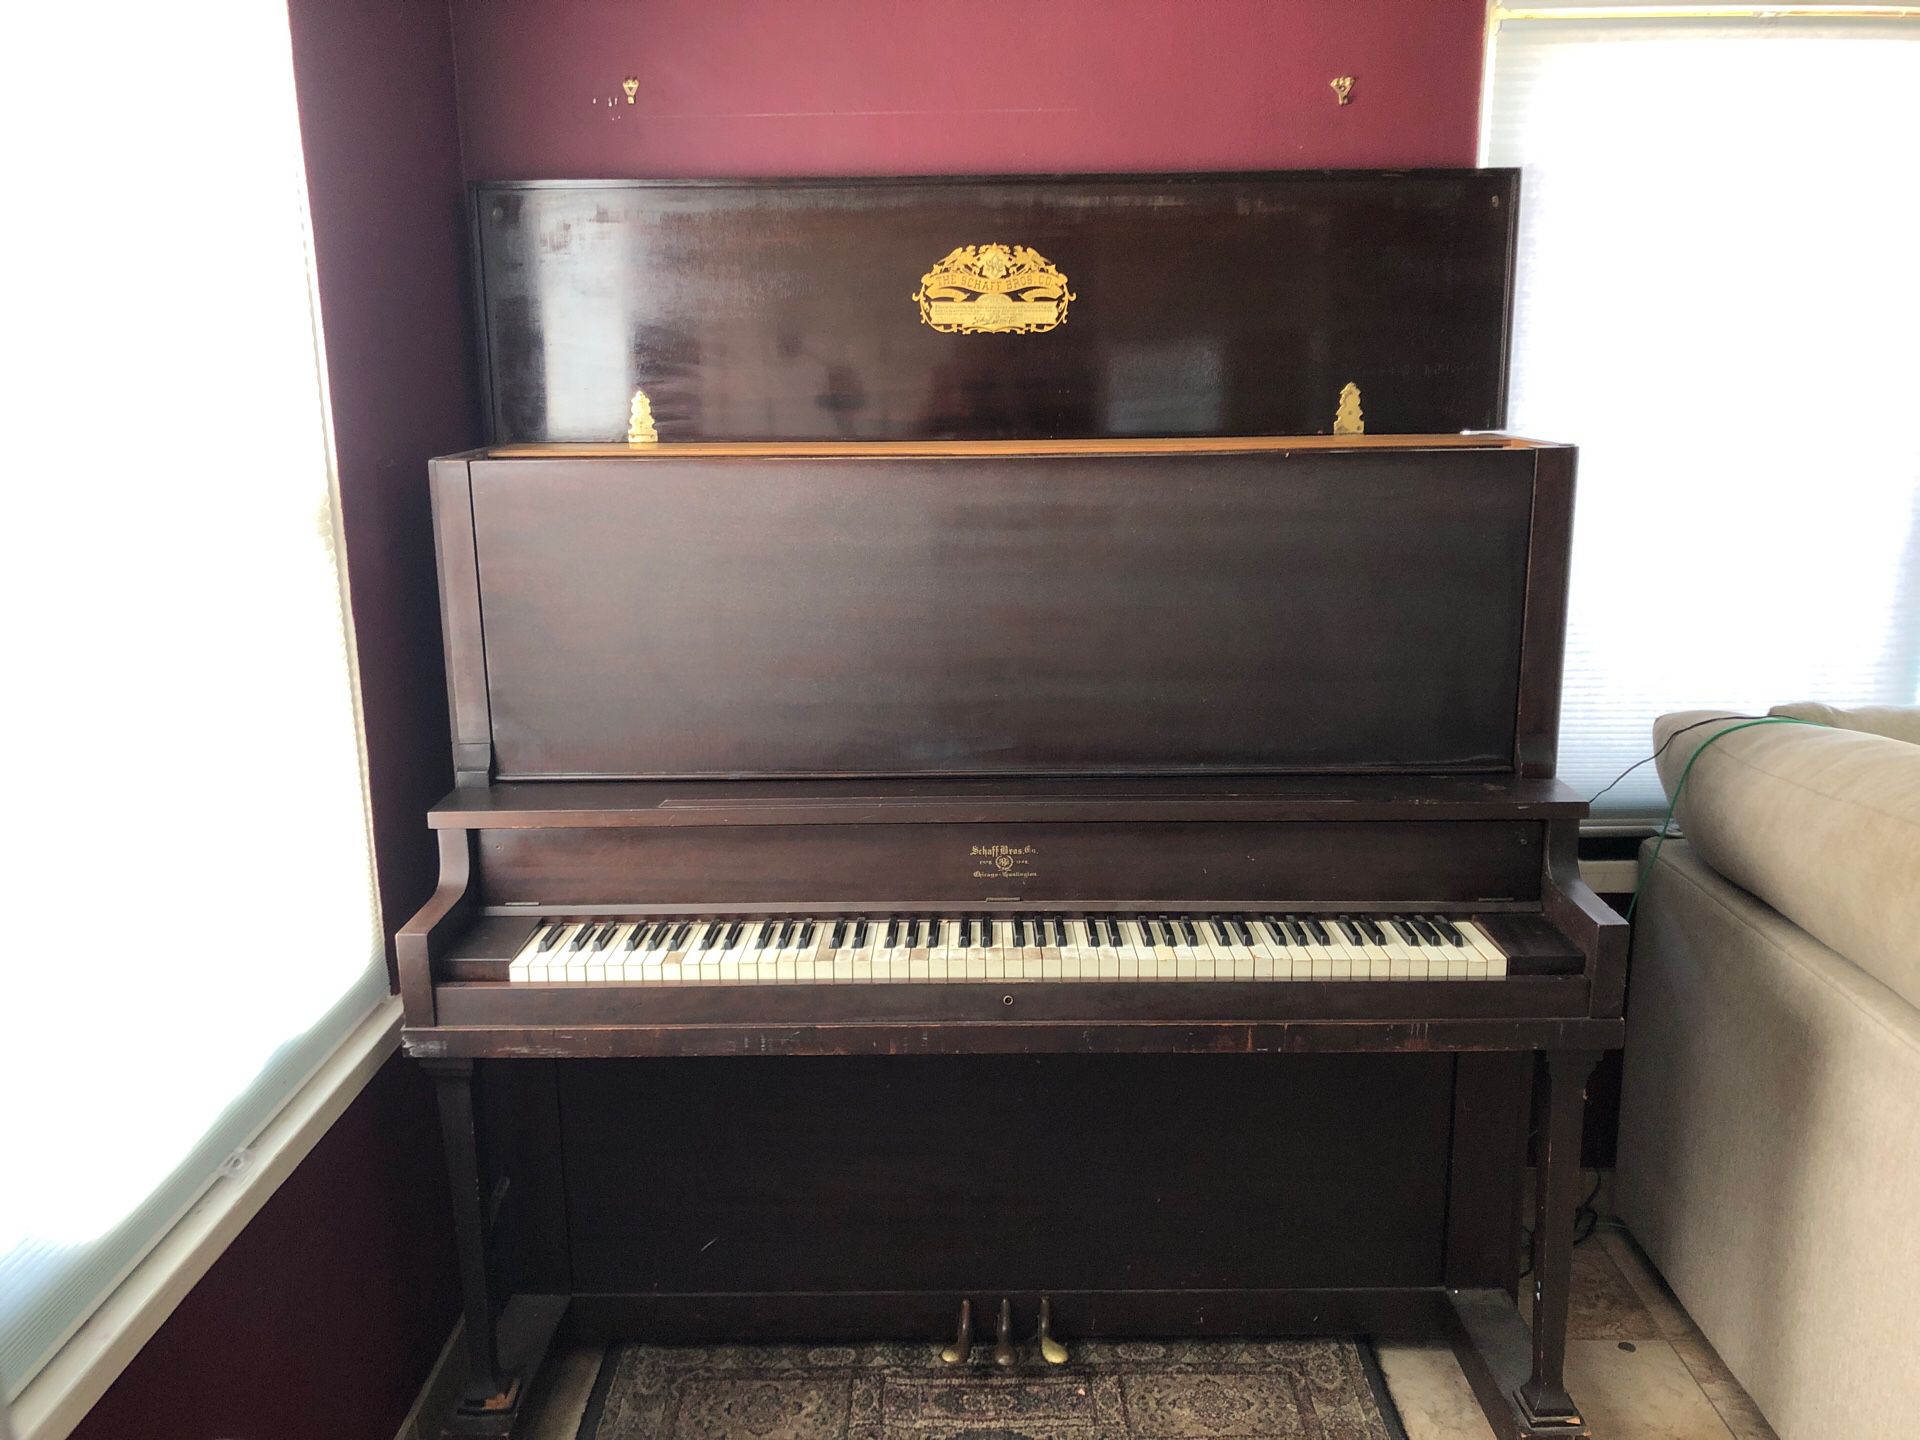 The Schaff bros. Co. Up right piano